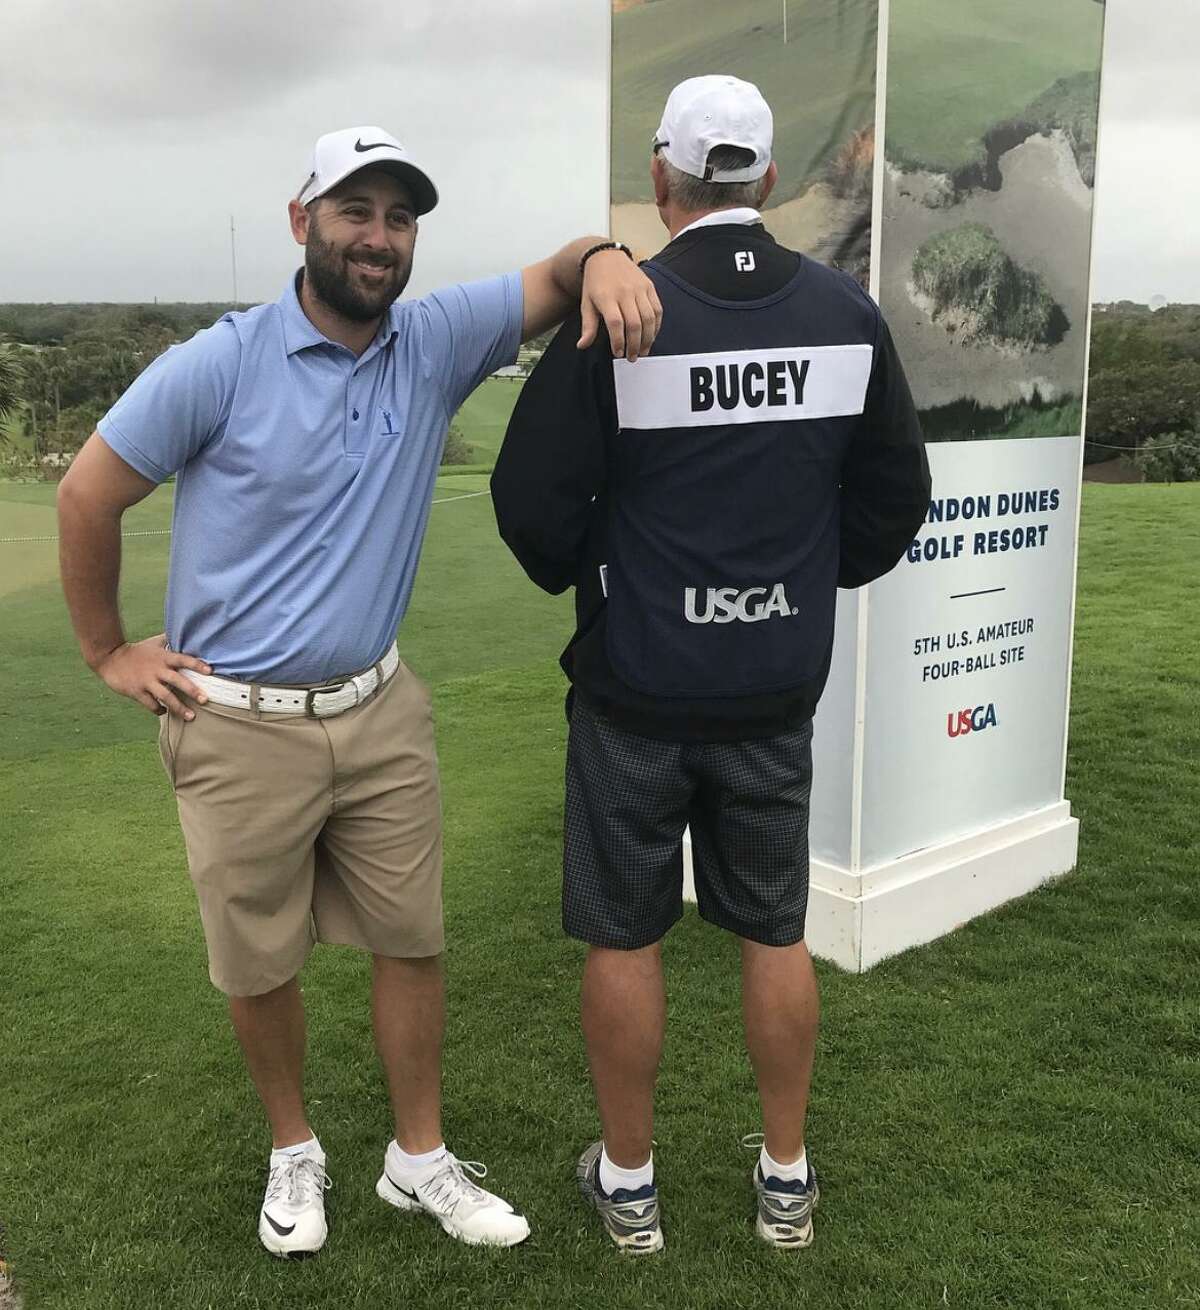 Bobby Bucey of Concord savors having his dad, Bob, as his caddie during amateur events.